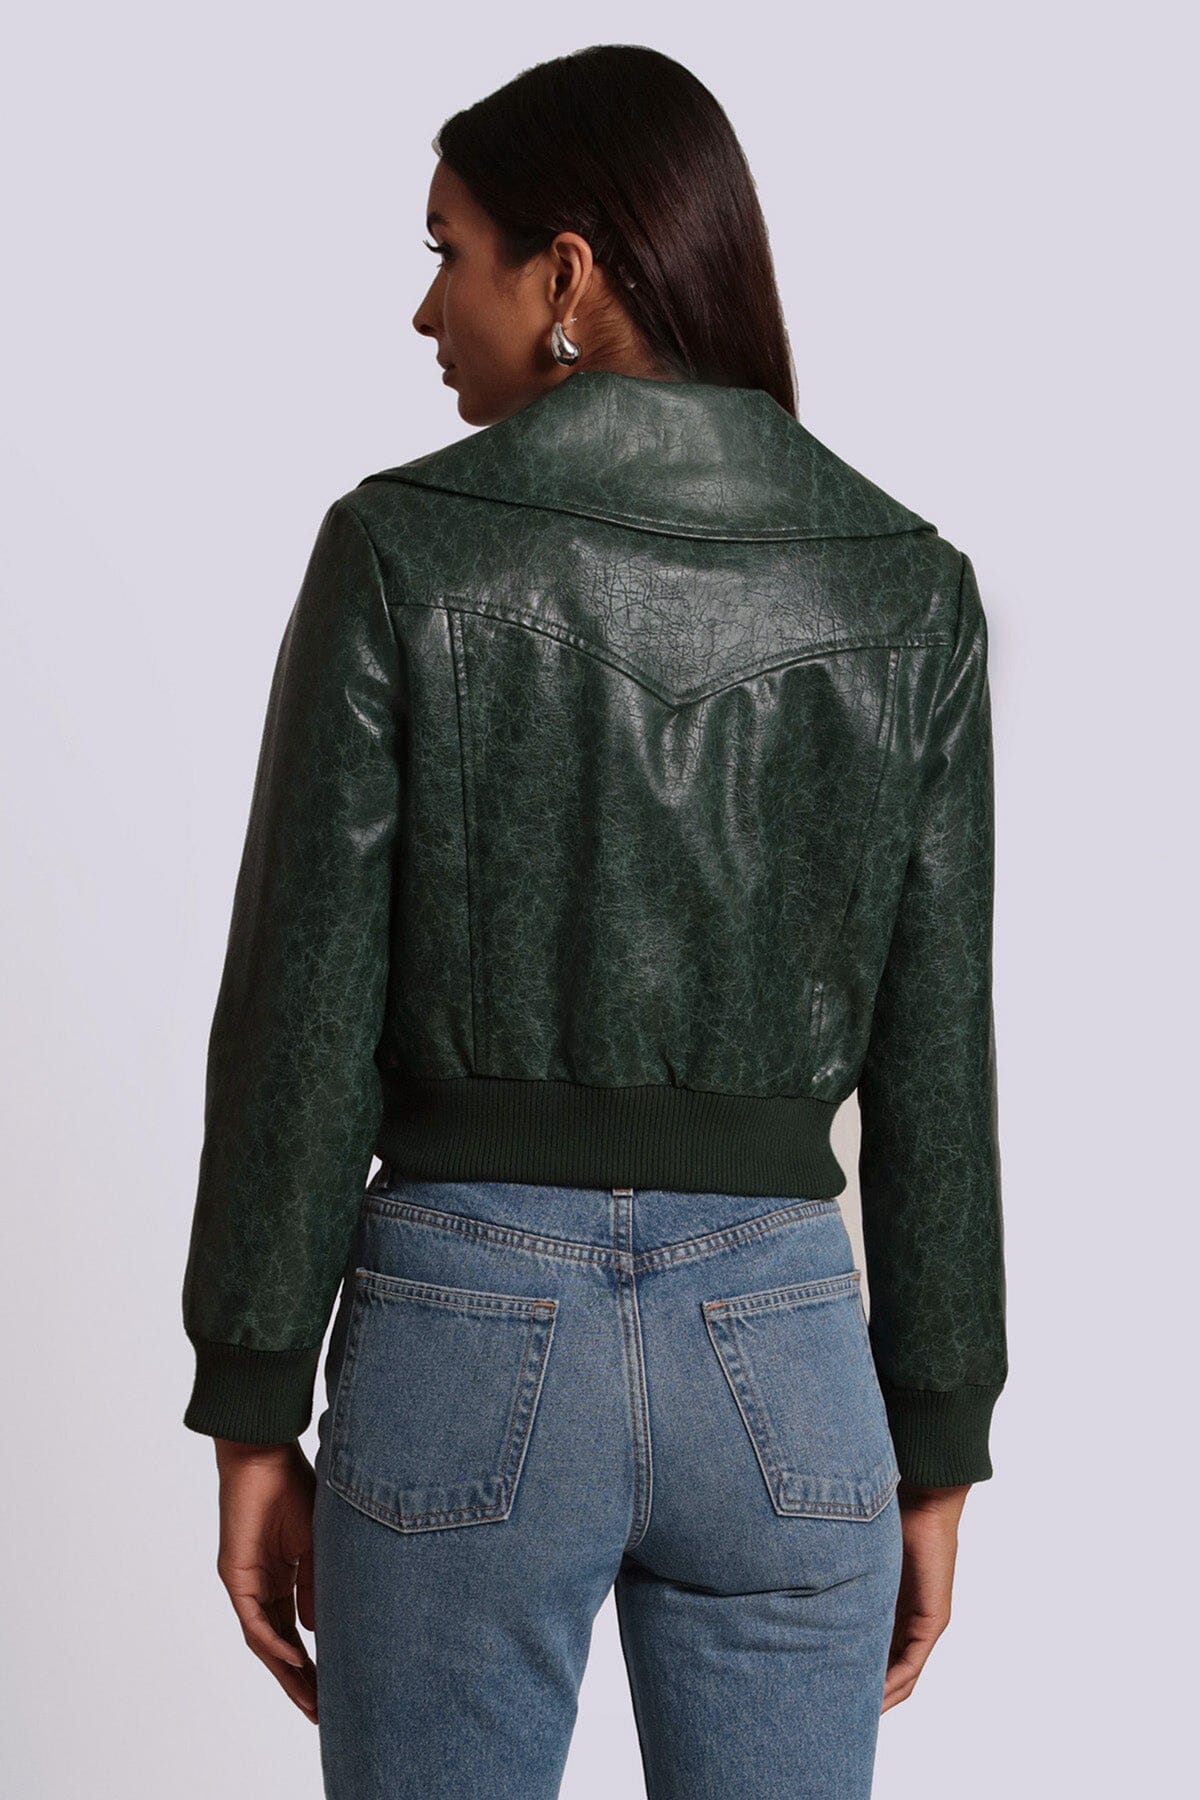 Emerald green faux ever leather cropped aviator jacket coat - women's figure flattering jackets coats for fall 2023